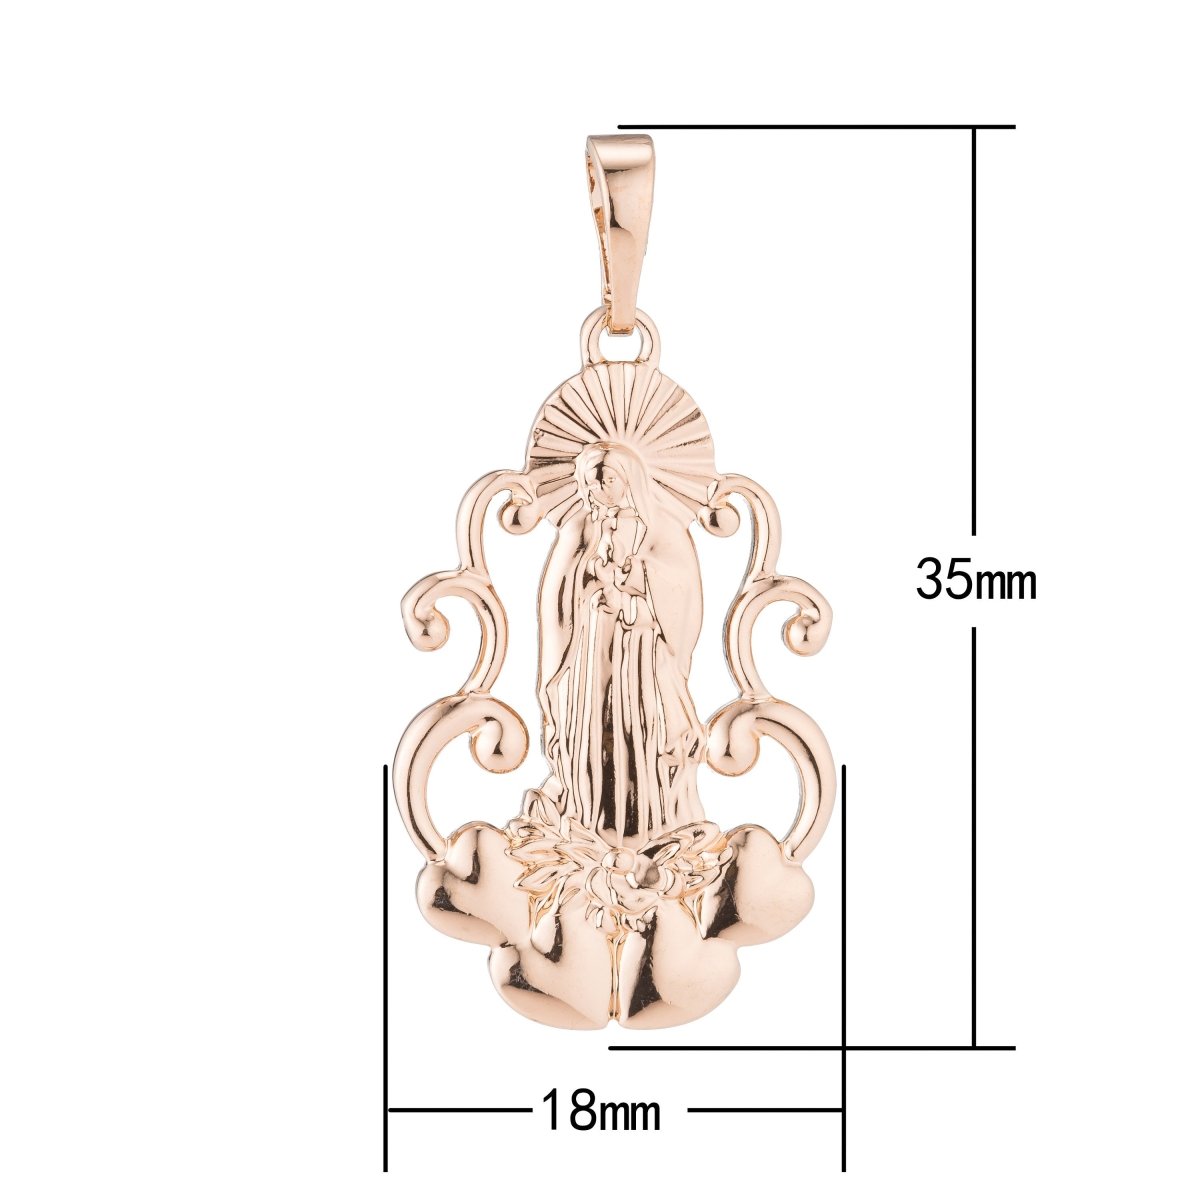 Rose Gold, Heart, Love, Holy Mother Mary, Virgin, Saint, Catholic, Prayer, Necklace Pendant Charm Bead Bails Findings for Jewelry Making H-510 - DLUXCA